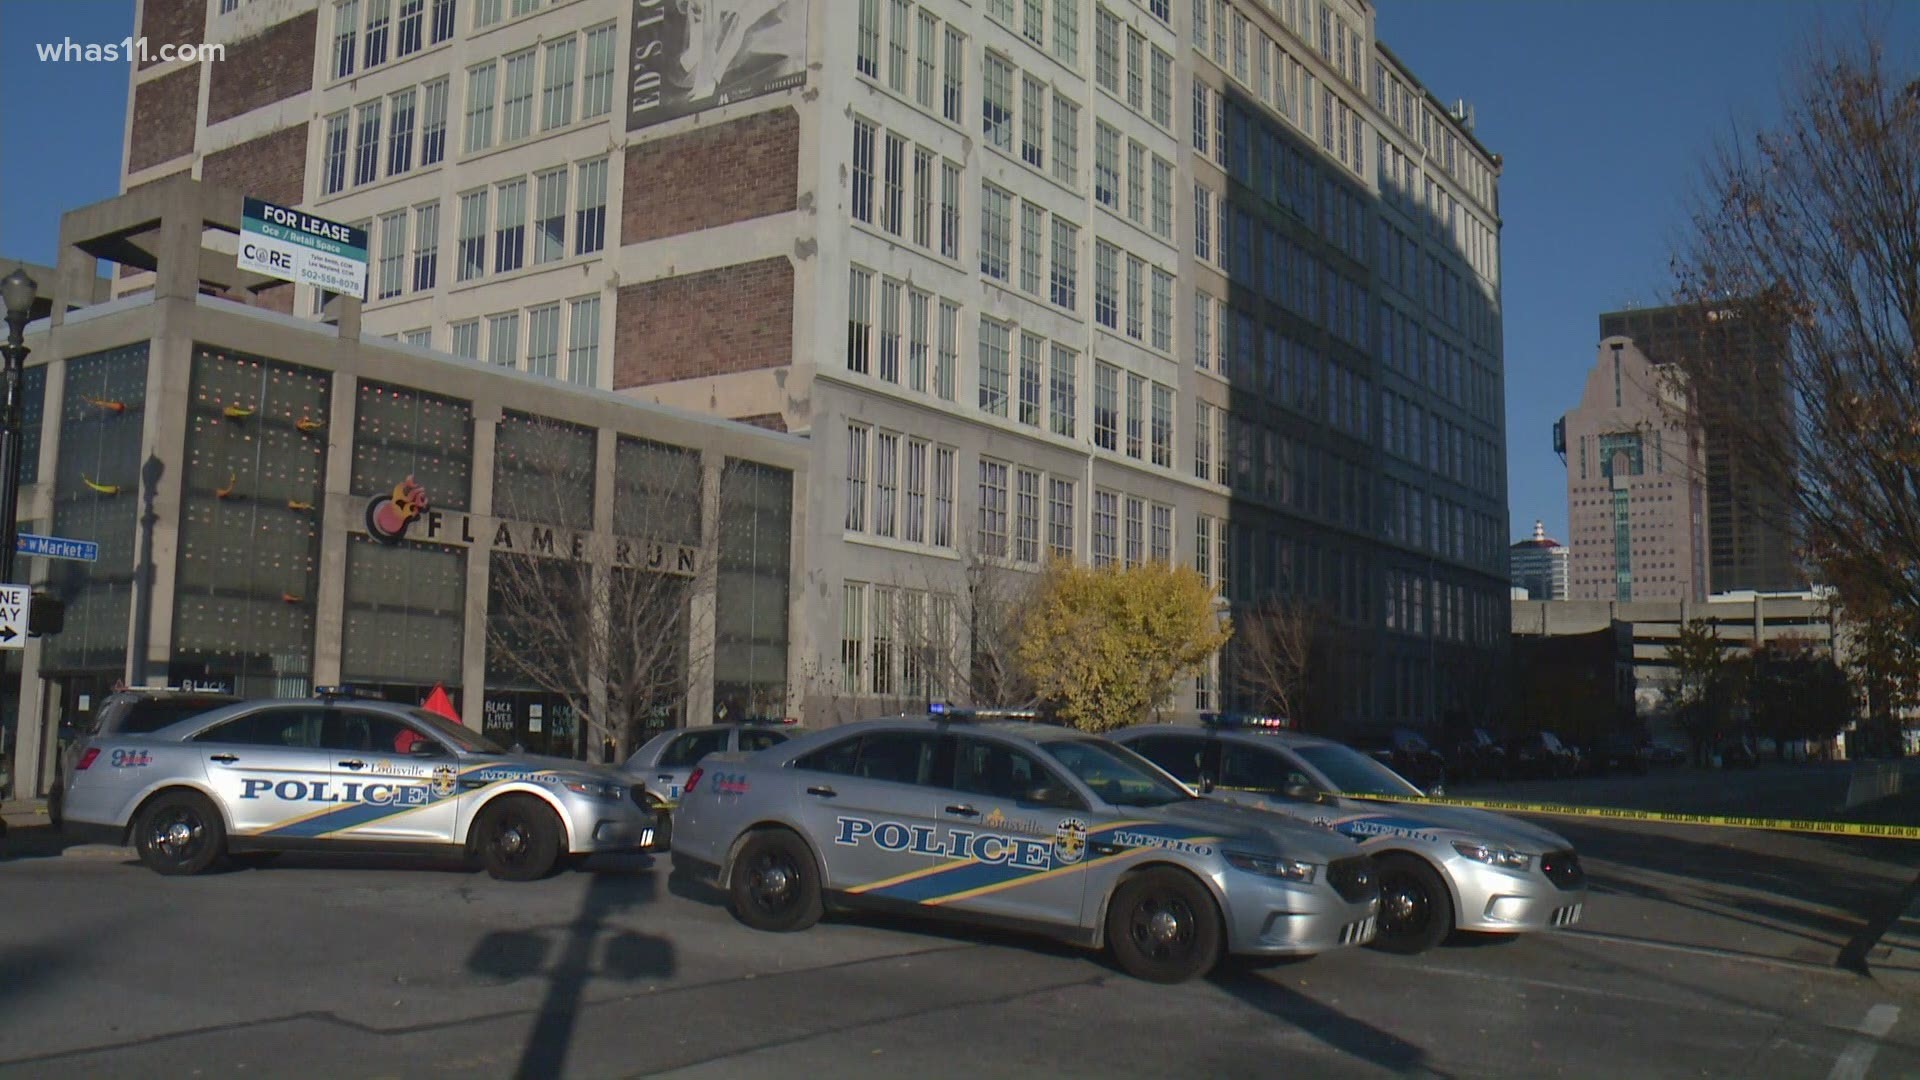 LMPD confirms &#39;active police situation&#39; in downtown Louisville | www.strongerinc.org